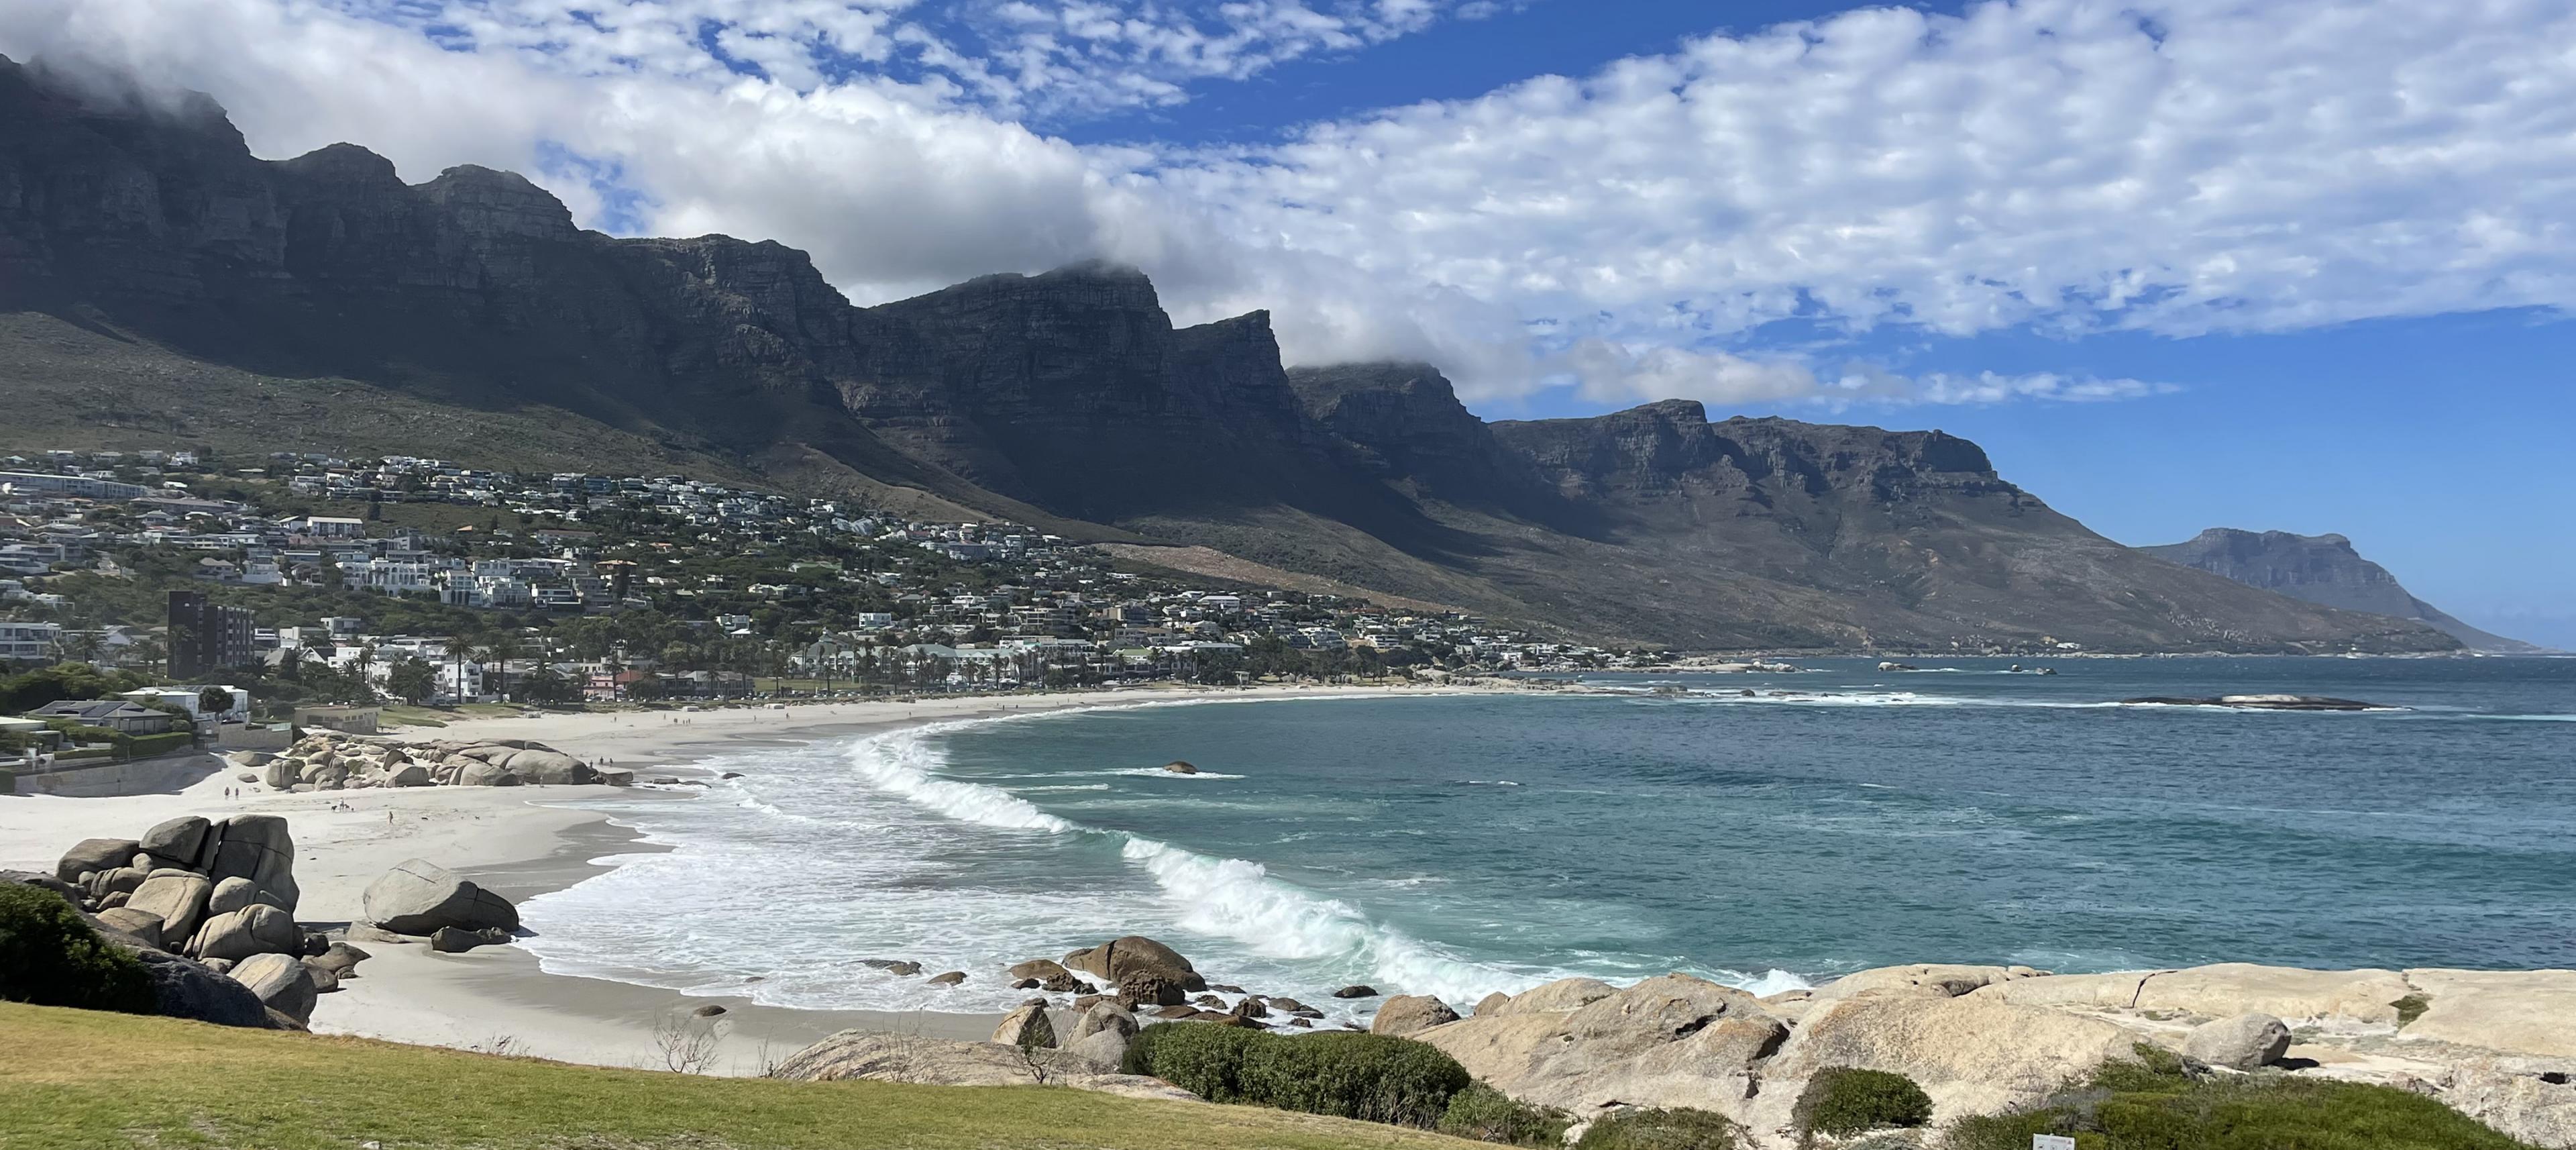 view of city of cape town coastline with table mountain on left and ocean on right